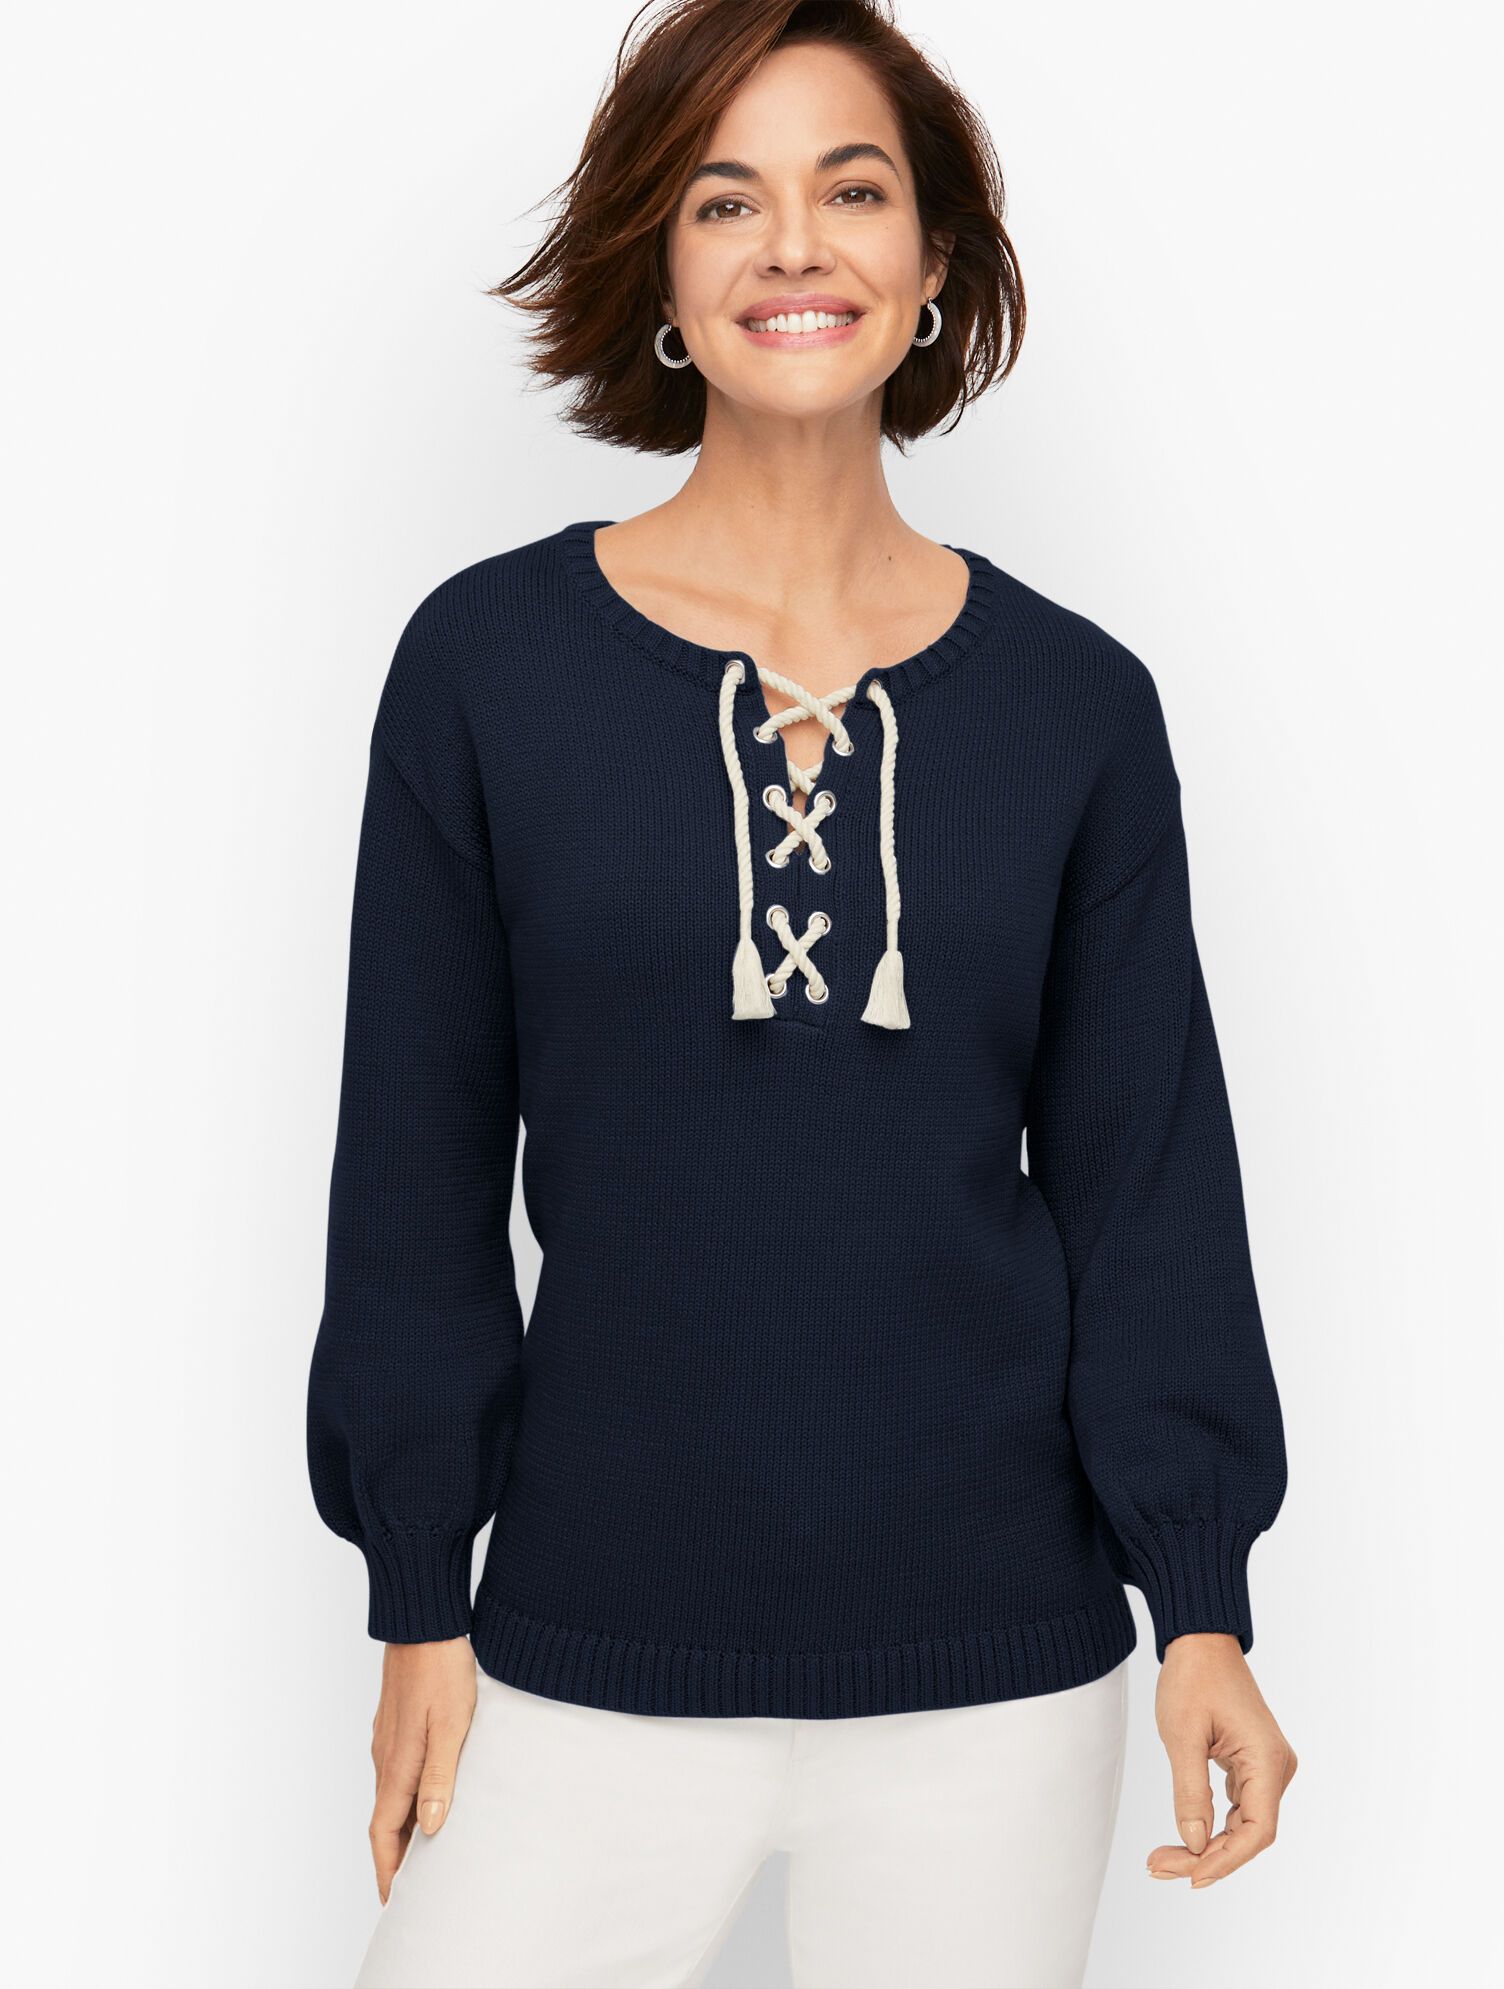 Lace Up Sweater | Talbots